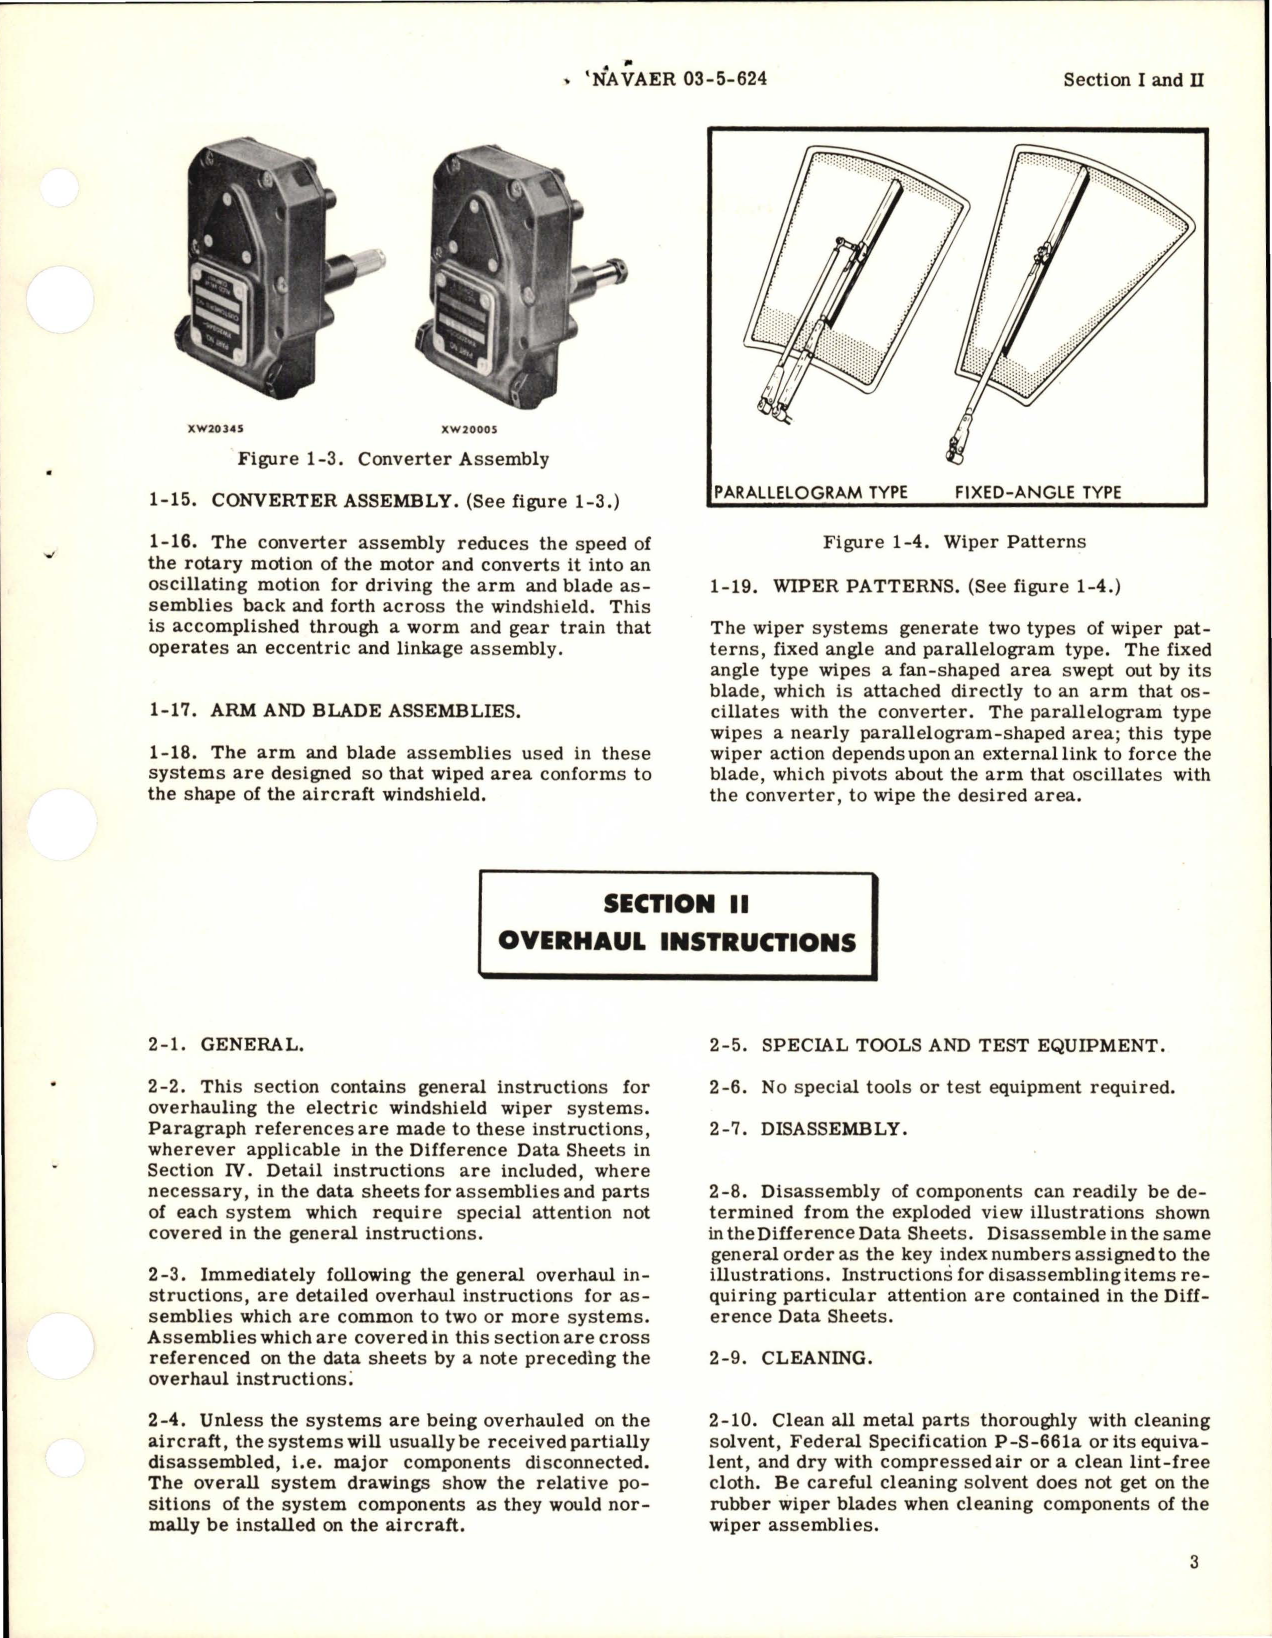 Sample page 5 from AirCorps Library document: Overhaul Instructions for Electric Windshield Wiper Systems  